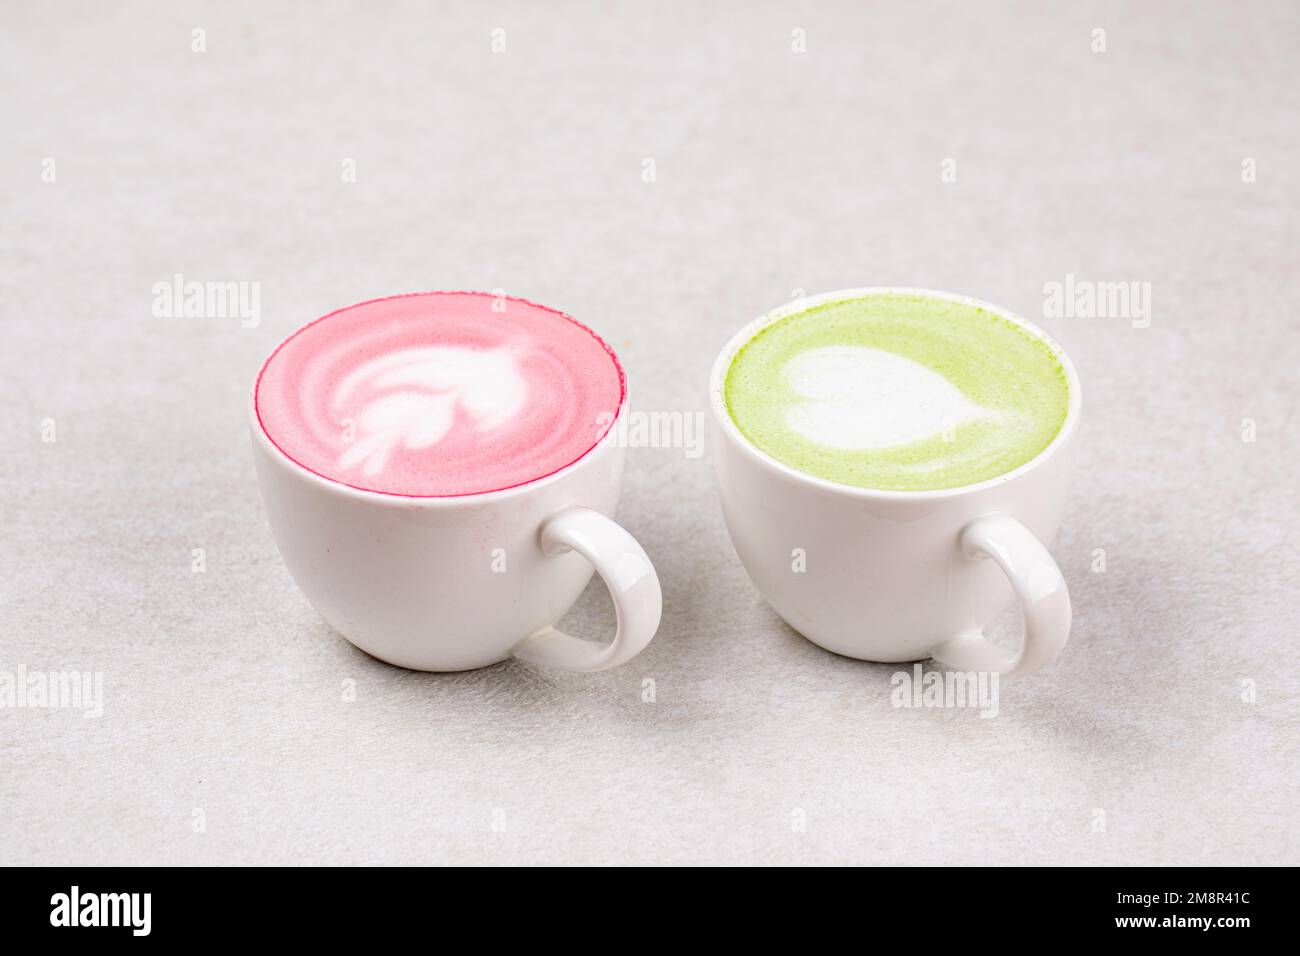 Two cups of different matcha latte drinks Stock Photo